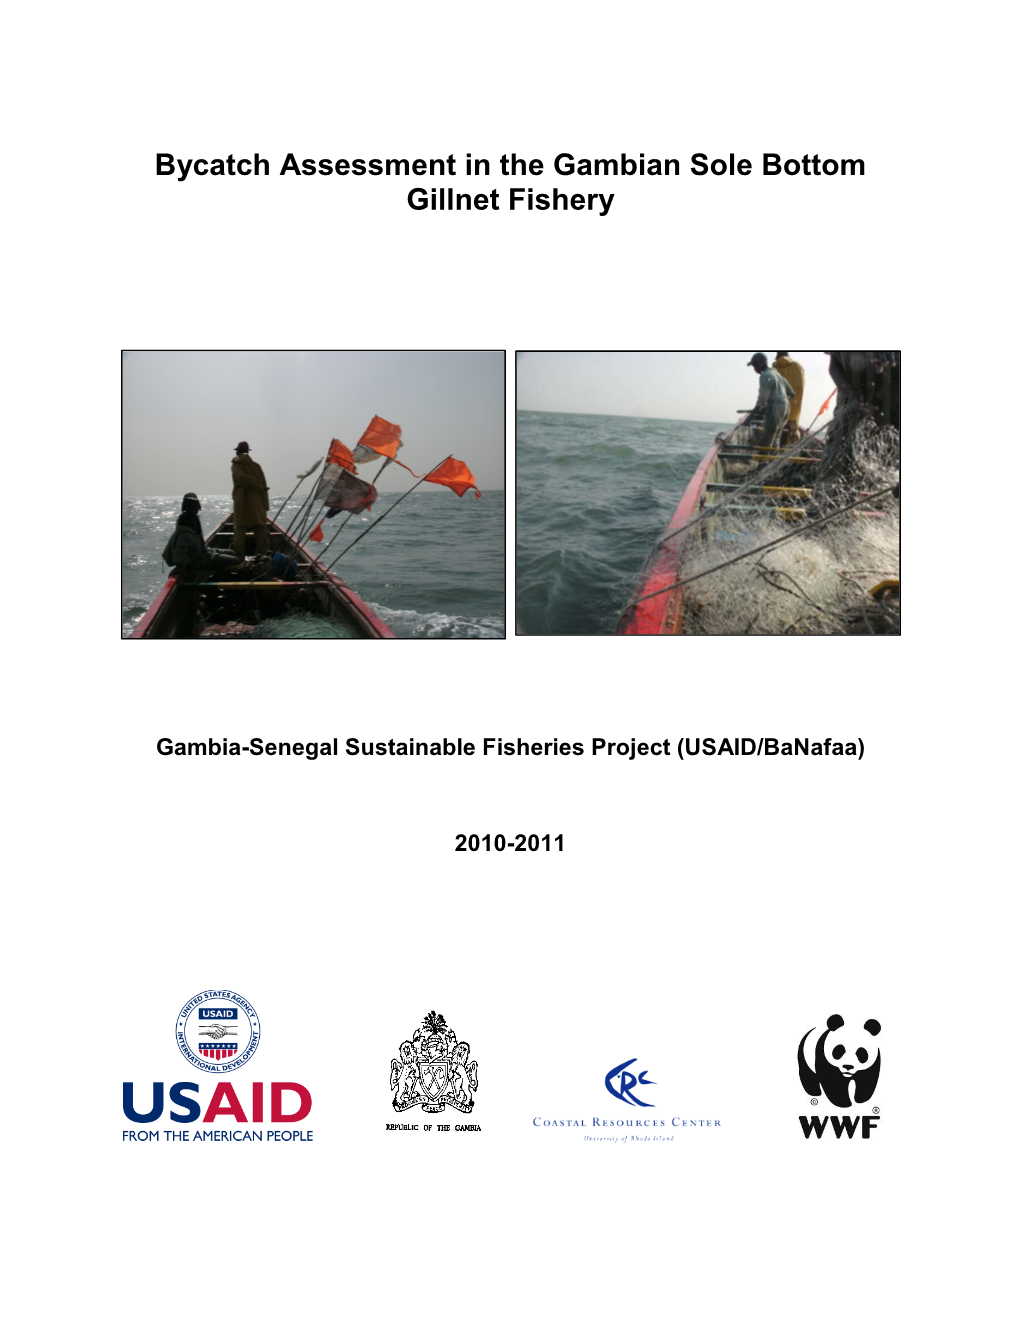 Bycatch Assessment in the Gambian Sole Bottom Gillnet Fishery